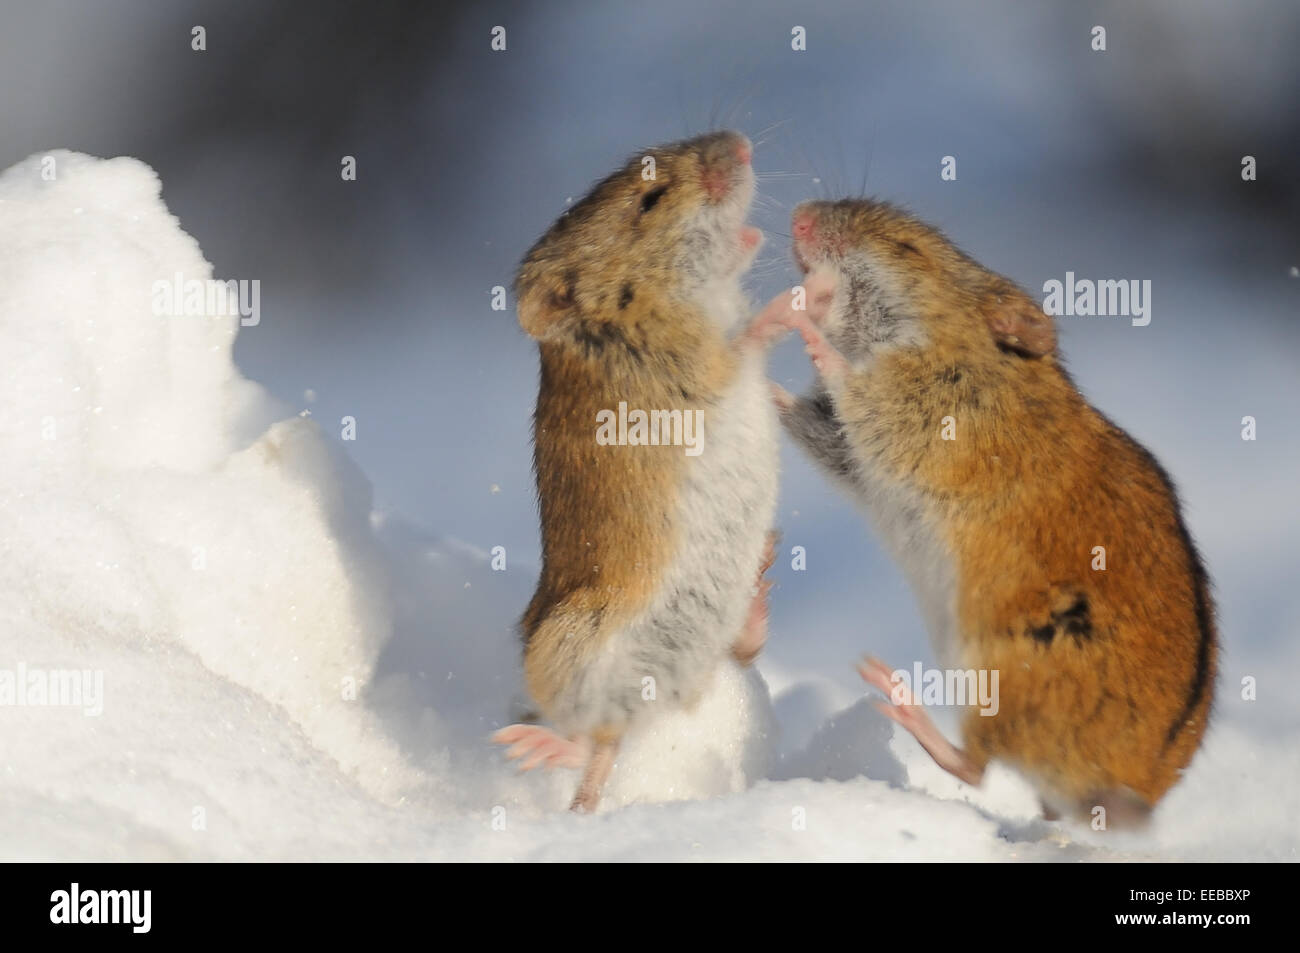 Battle of two winter mice Stock Photo